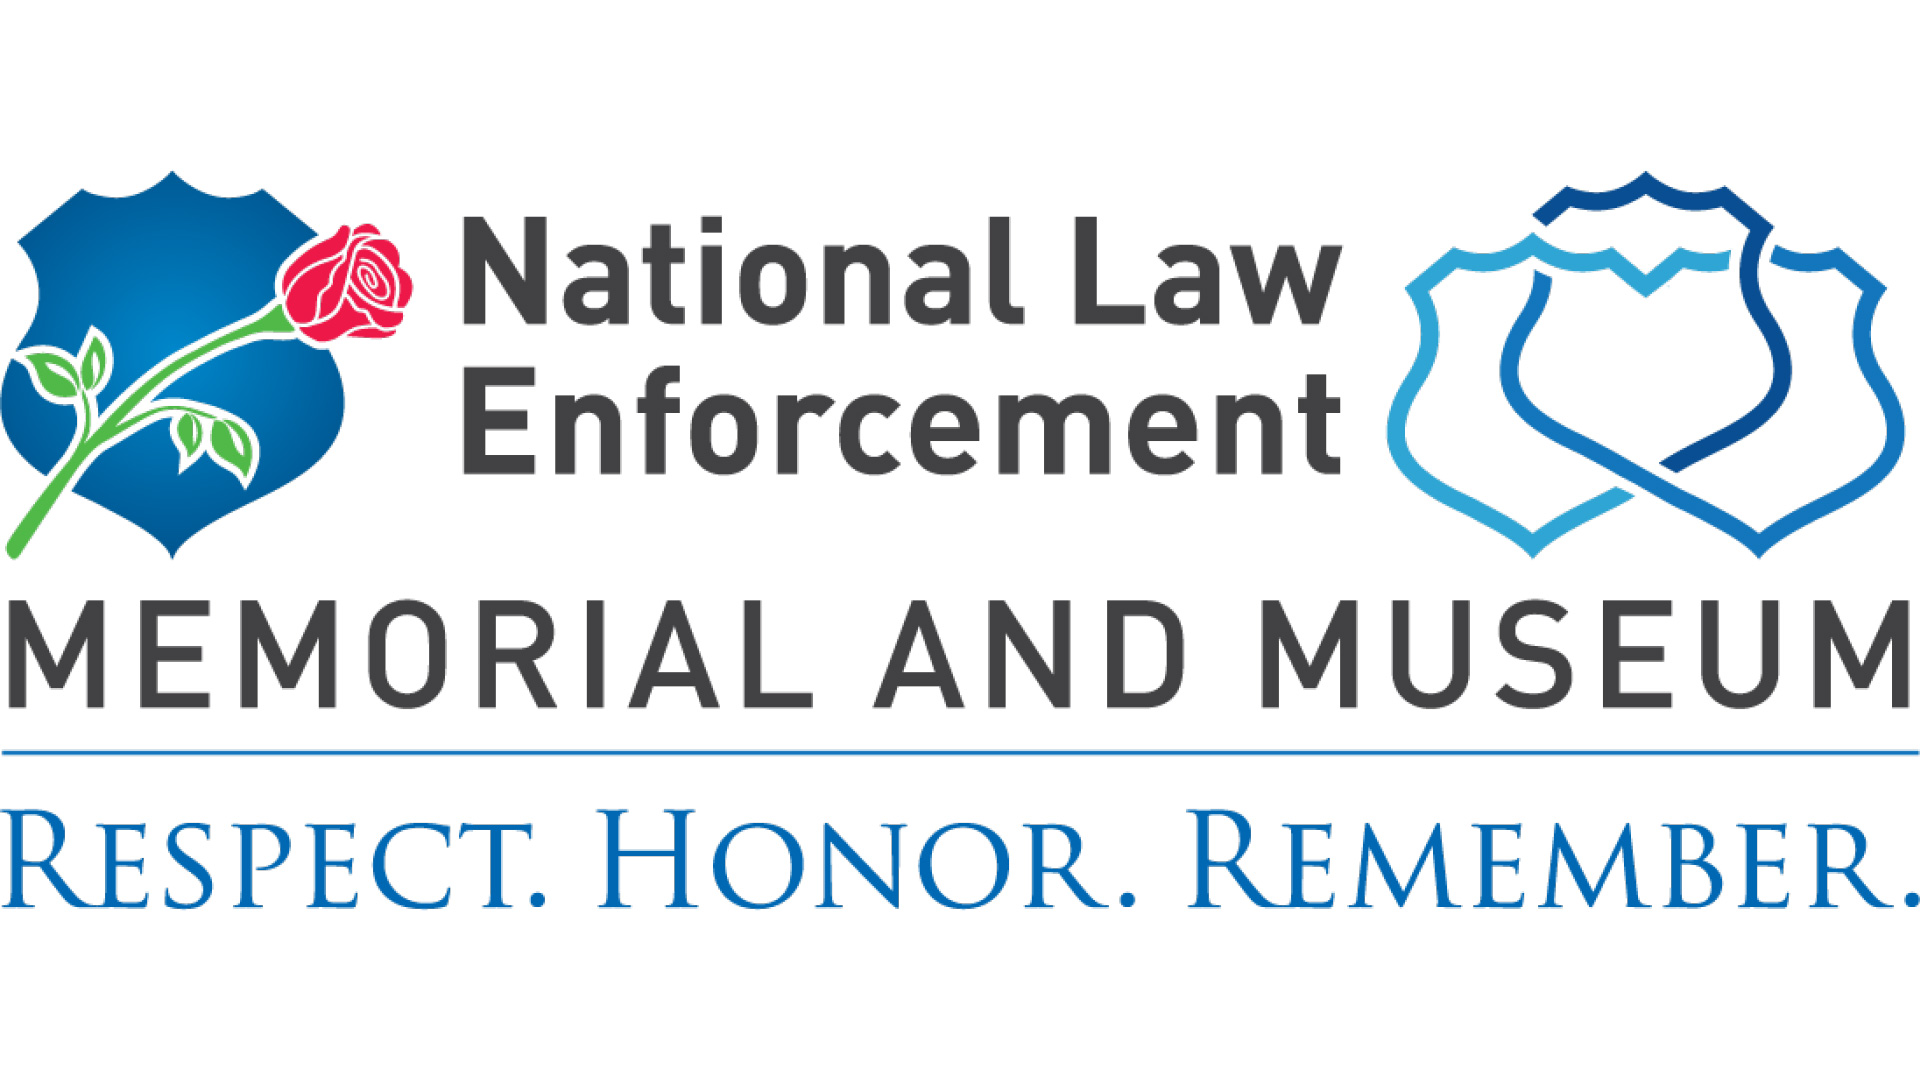 MissionSquare Retirement Partners with NLEOMF In Honoring Law Enforcement